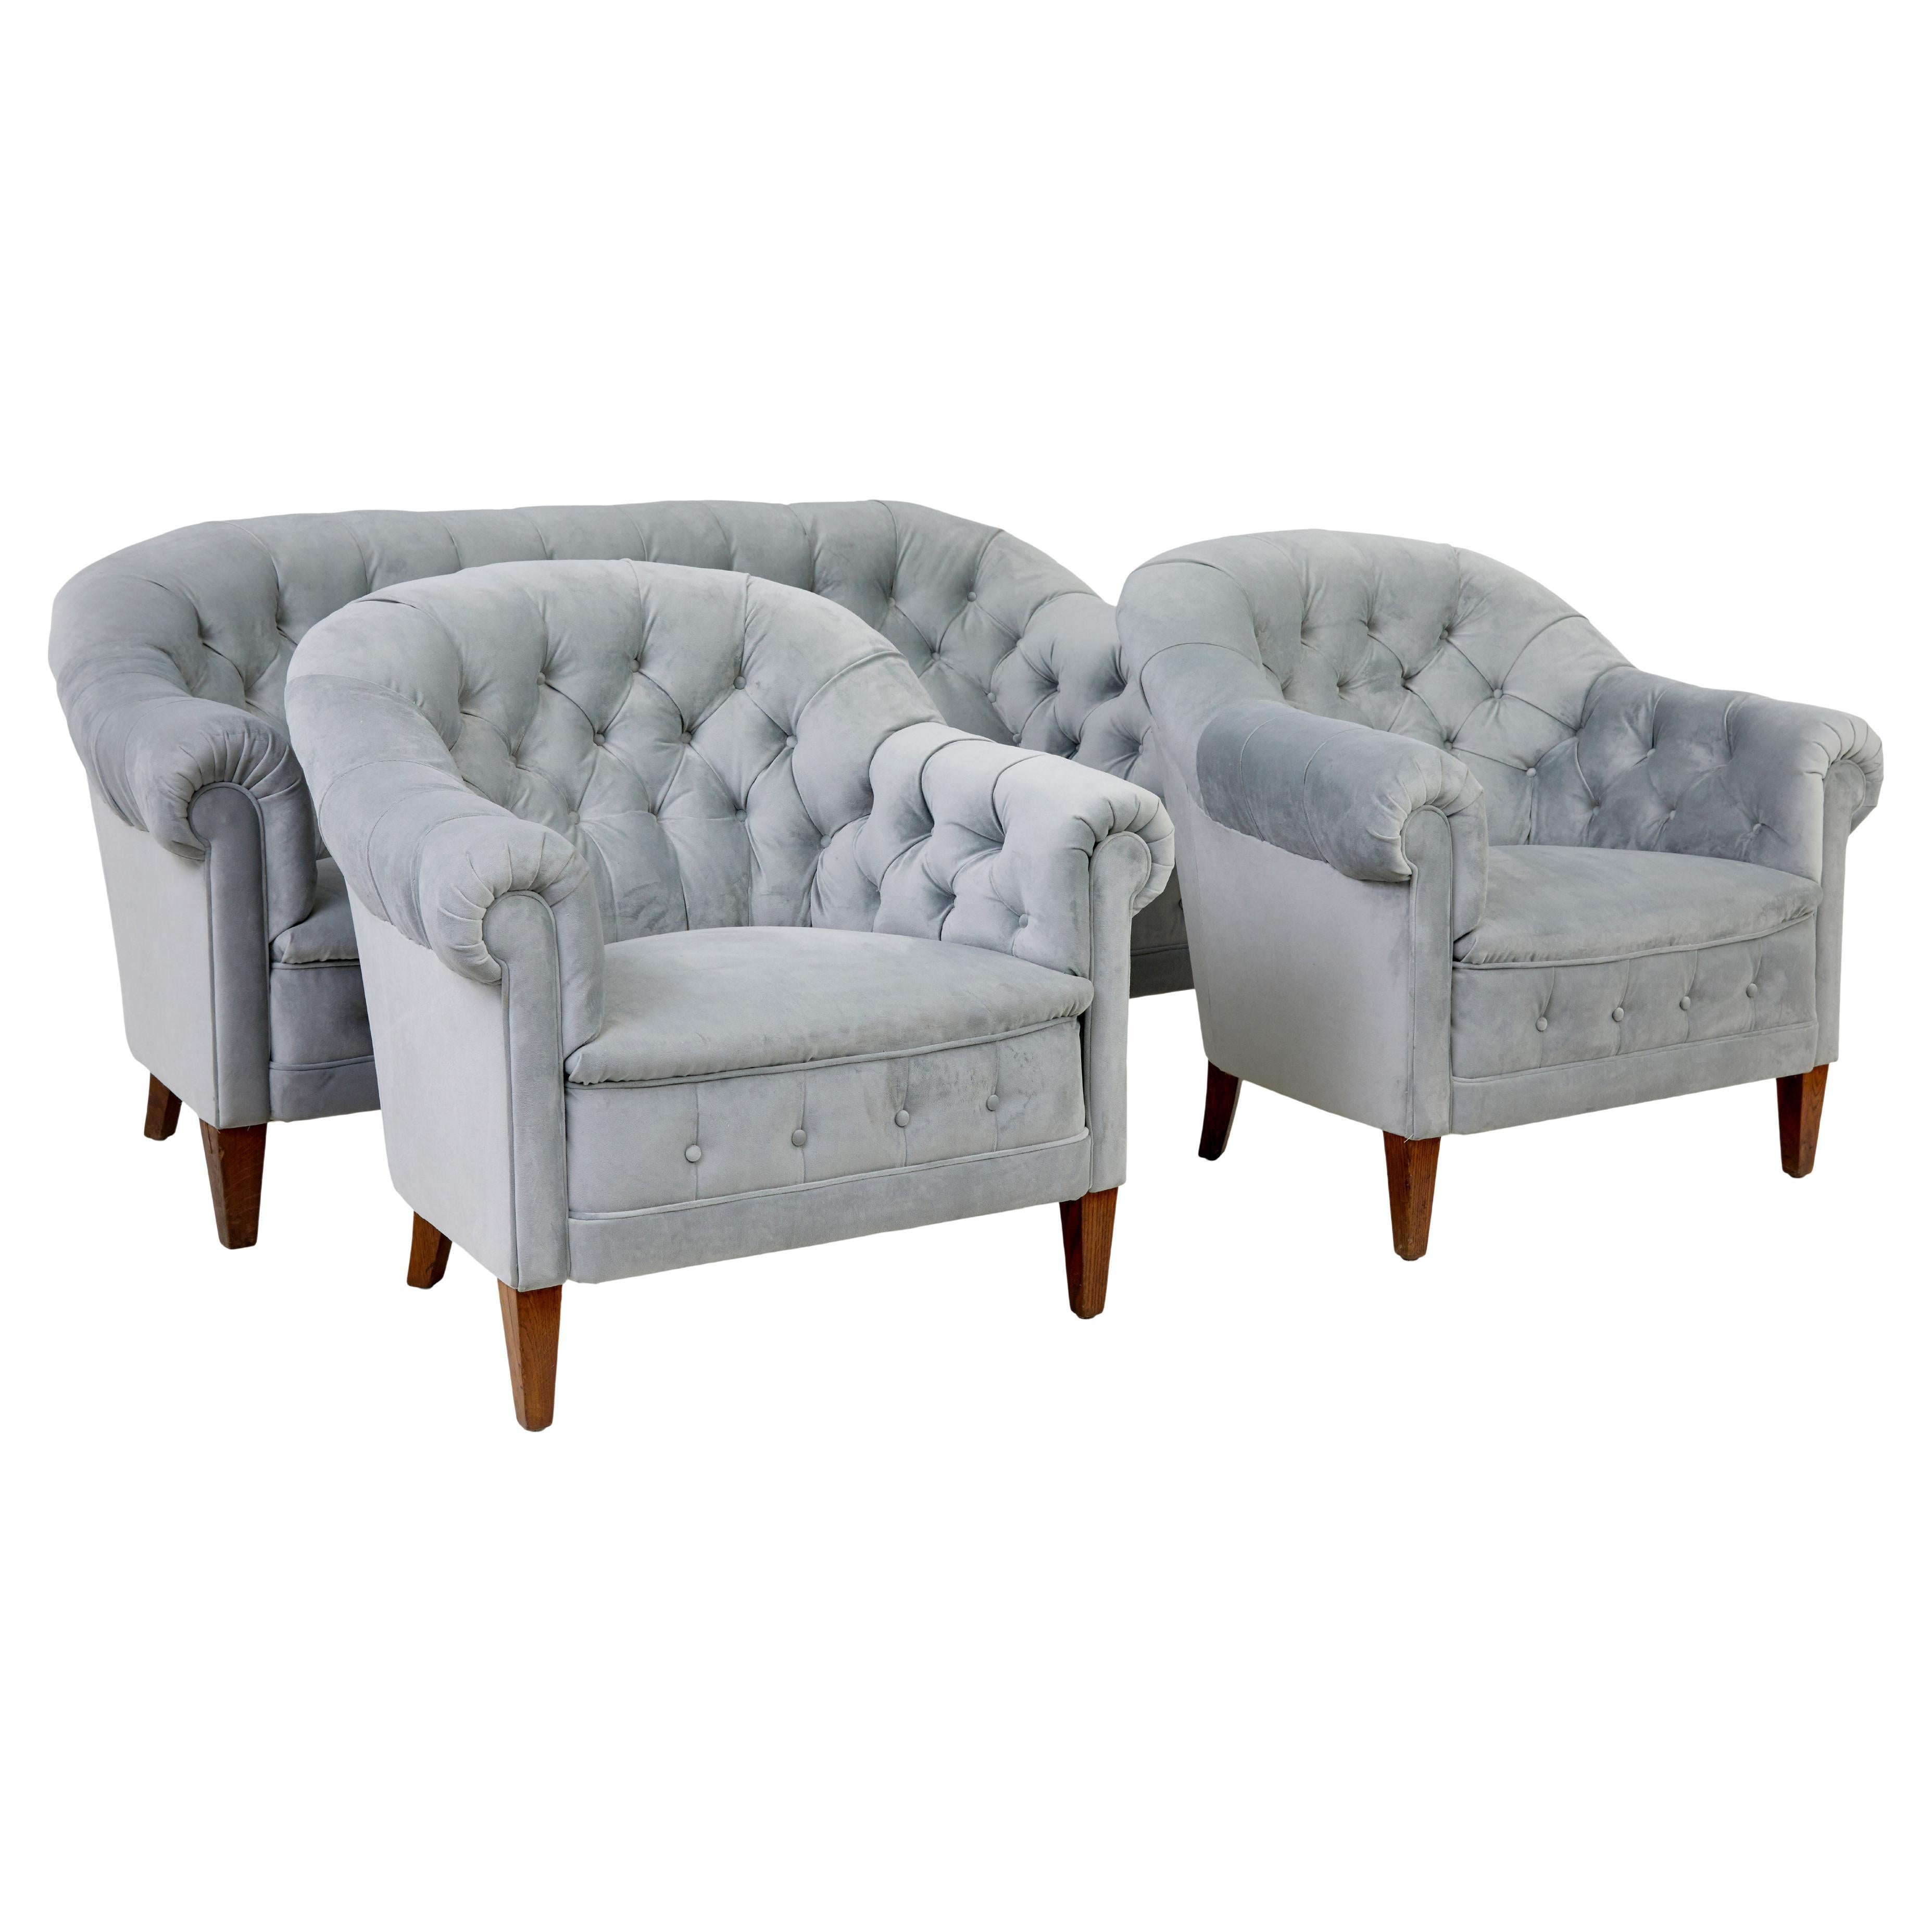 Early 20th century buttonback 3 piece suite sofa and 2 chairs For Sale